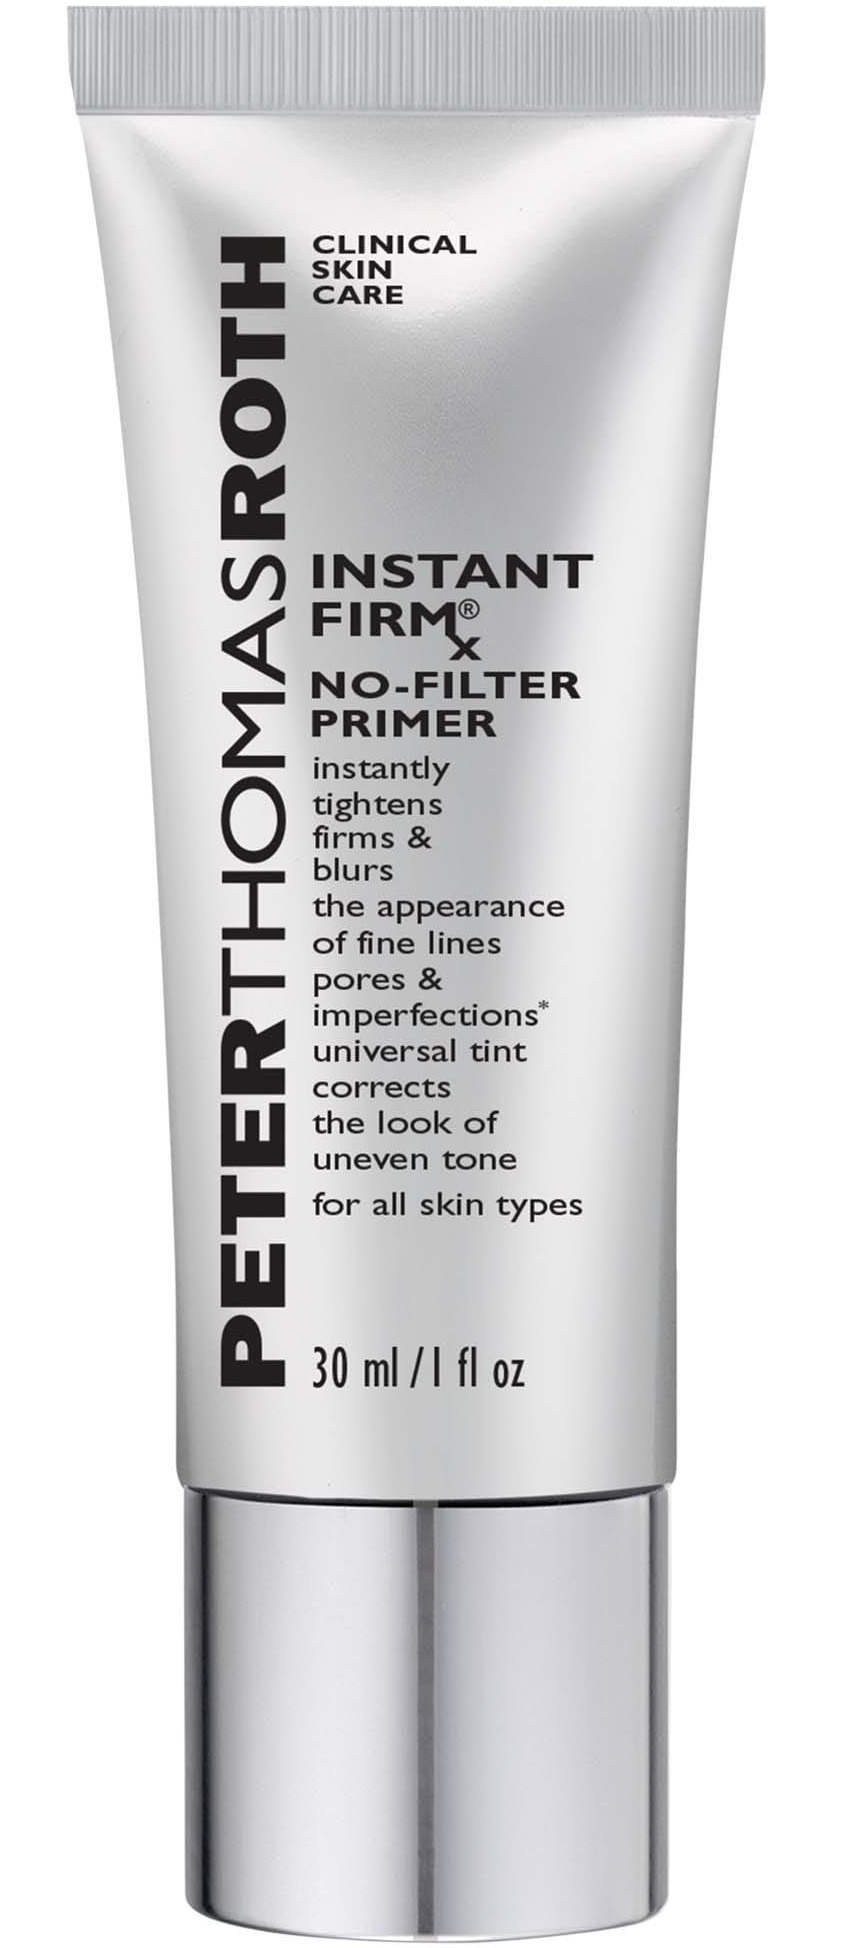 Peter Thomas Roth Instant Firmx No Filter Primer Front Photo Original 